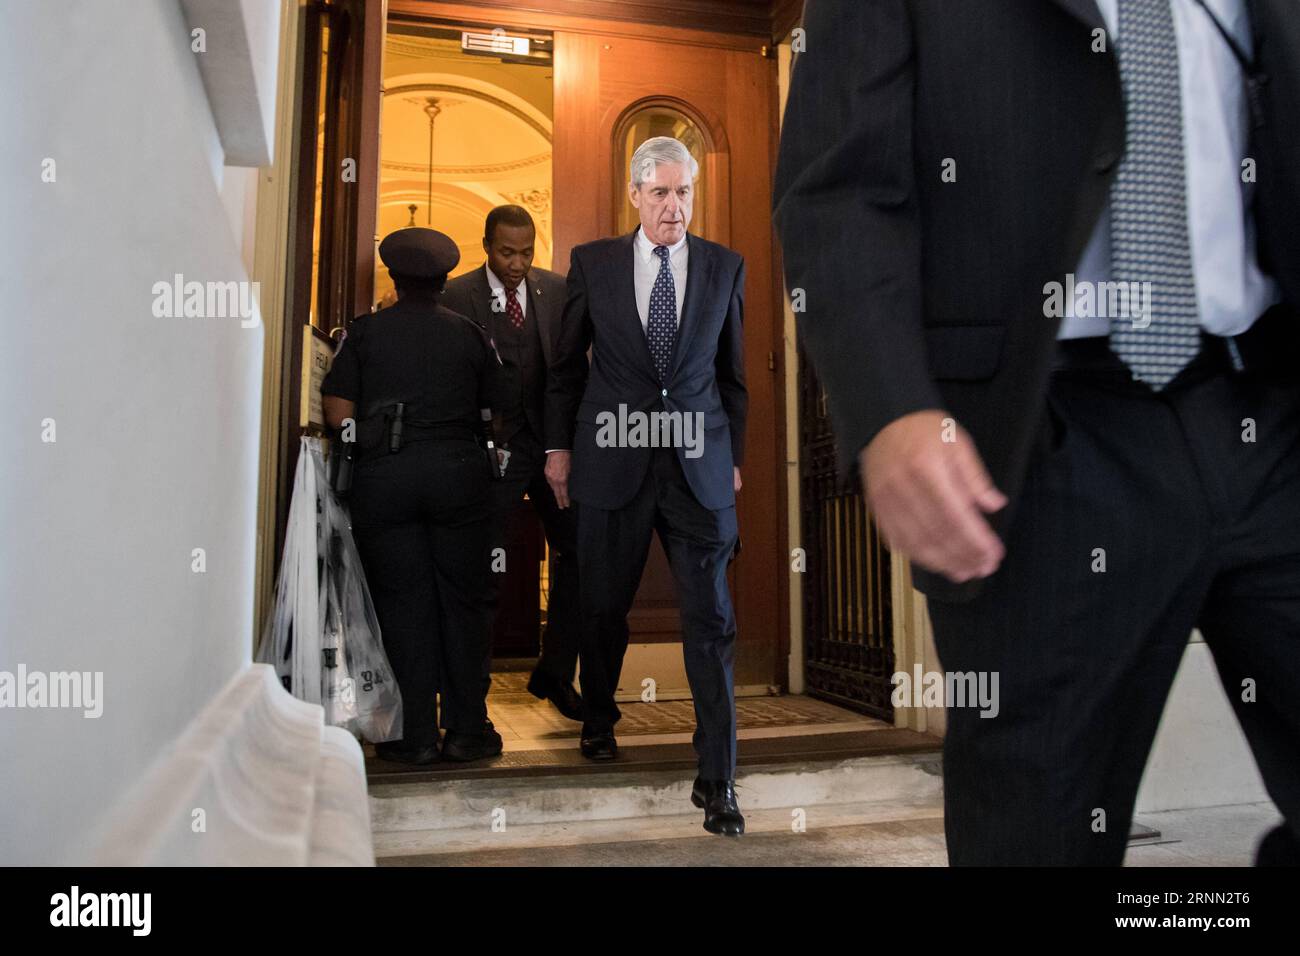 (170621) -- WASHINGTON, June 21, 2017 -- Former FBI Director Robert Mueller (C), the special counsel probing Russian interference in the 2016 U.S. election, leaves the Capitol building after meeting with the Senate Judiciary Committee on Capitol Hill in Washington D.C., the United States, on June 21, 2017. ) U.S.-WASHINGTON D.C.-CAPITOL-MUELLER TingxShen PUBLICATIONxNOTxINxCHN   Washington June 21 2017 Former FBI Director Robert Mueller C The Special Counsel probing Russian interference in The 2016 U S ELECTION Leaves The Capitol Building After Meeting With The Senate Judiciary Committee ON Ca Stock Photo